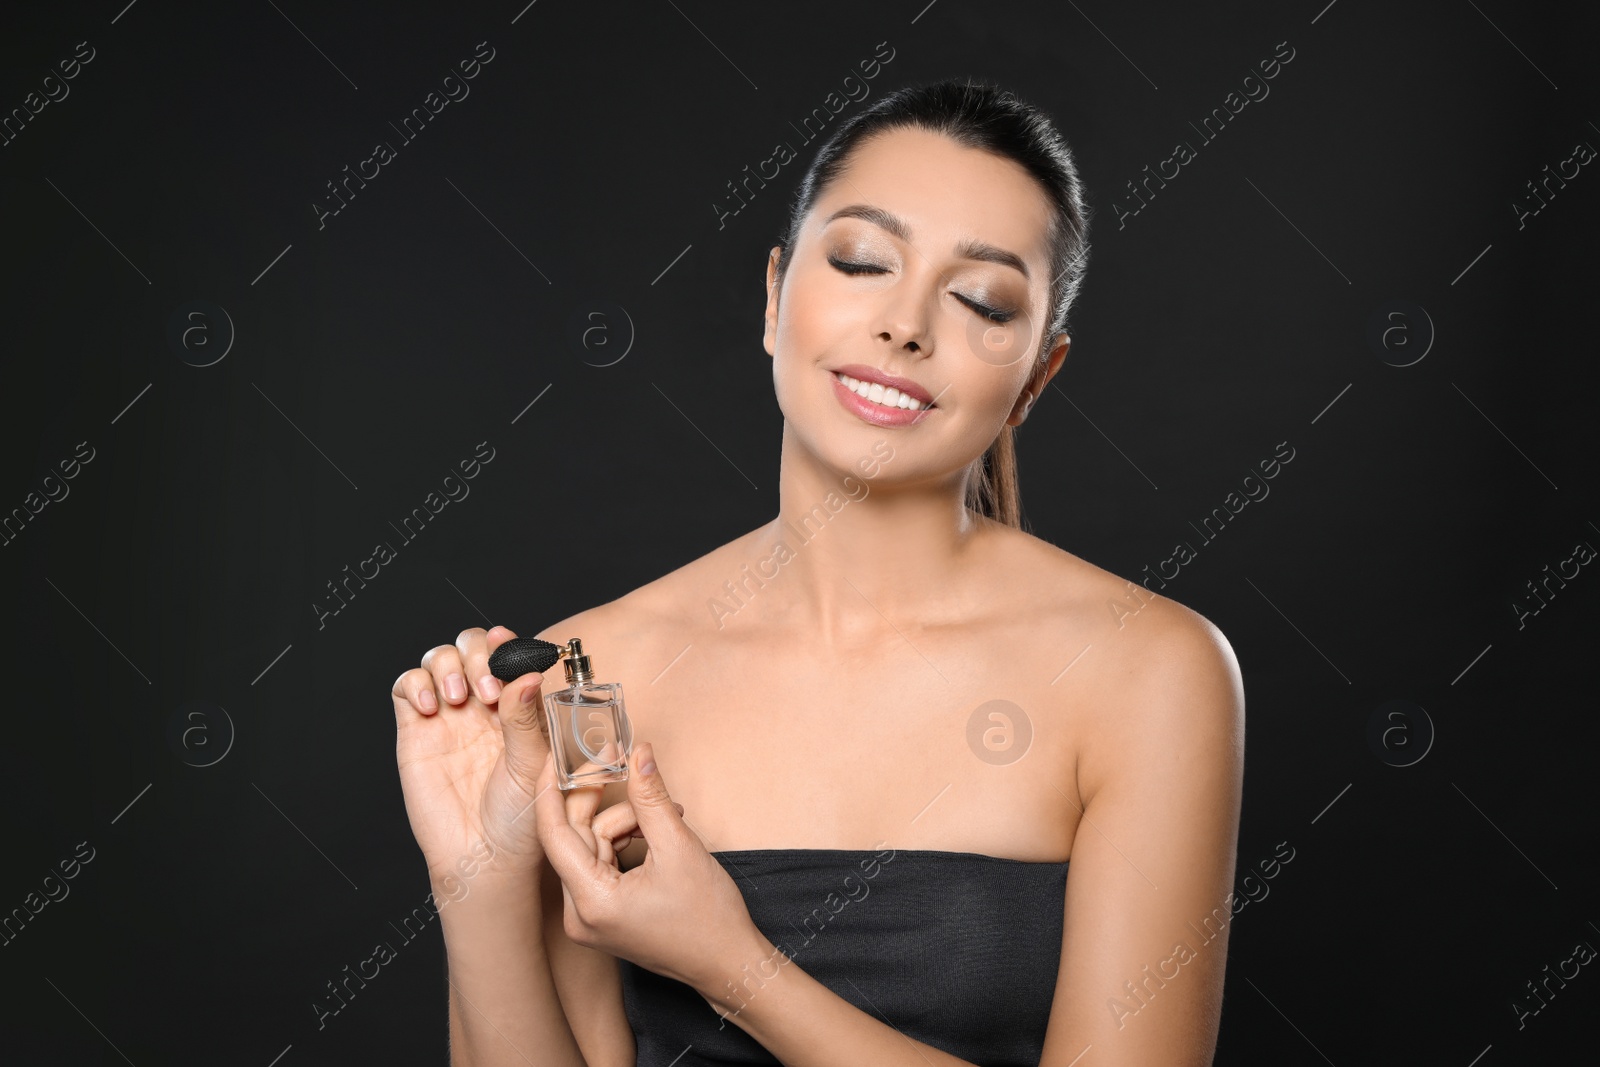 Photo of Young woman applying perfume against black background